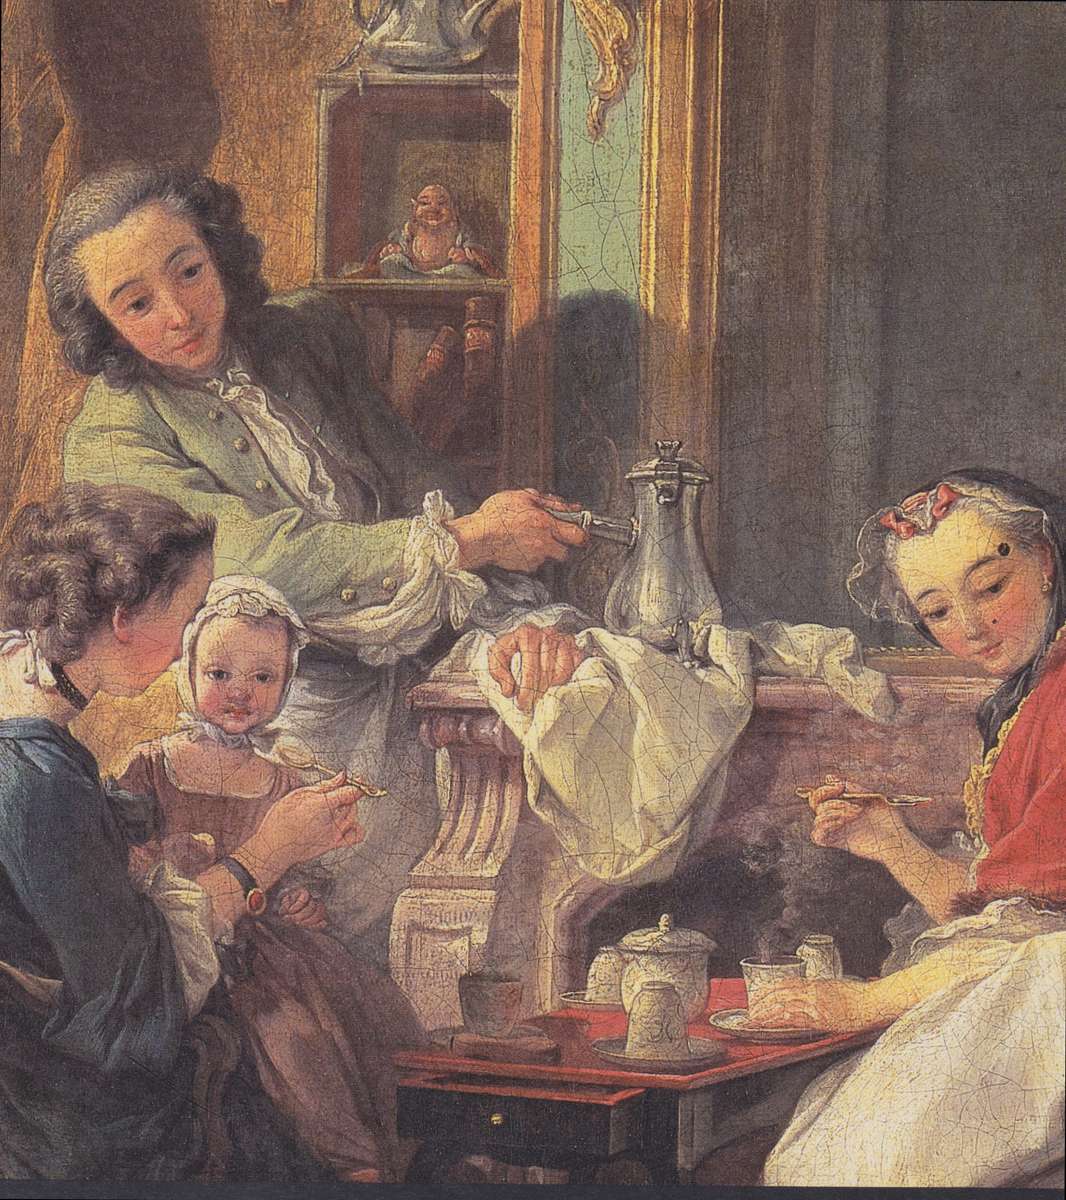 Francois Boucher "Breakfast" puzzle online from photo